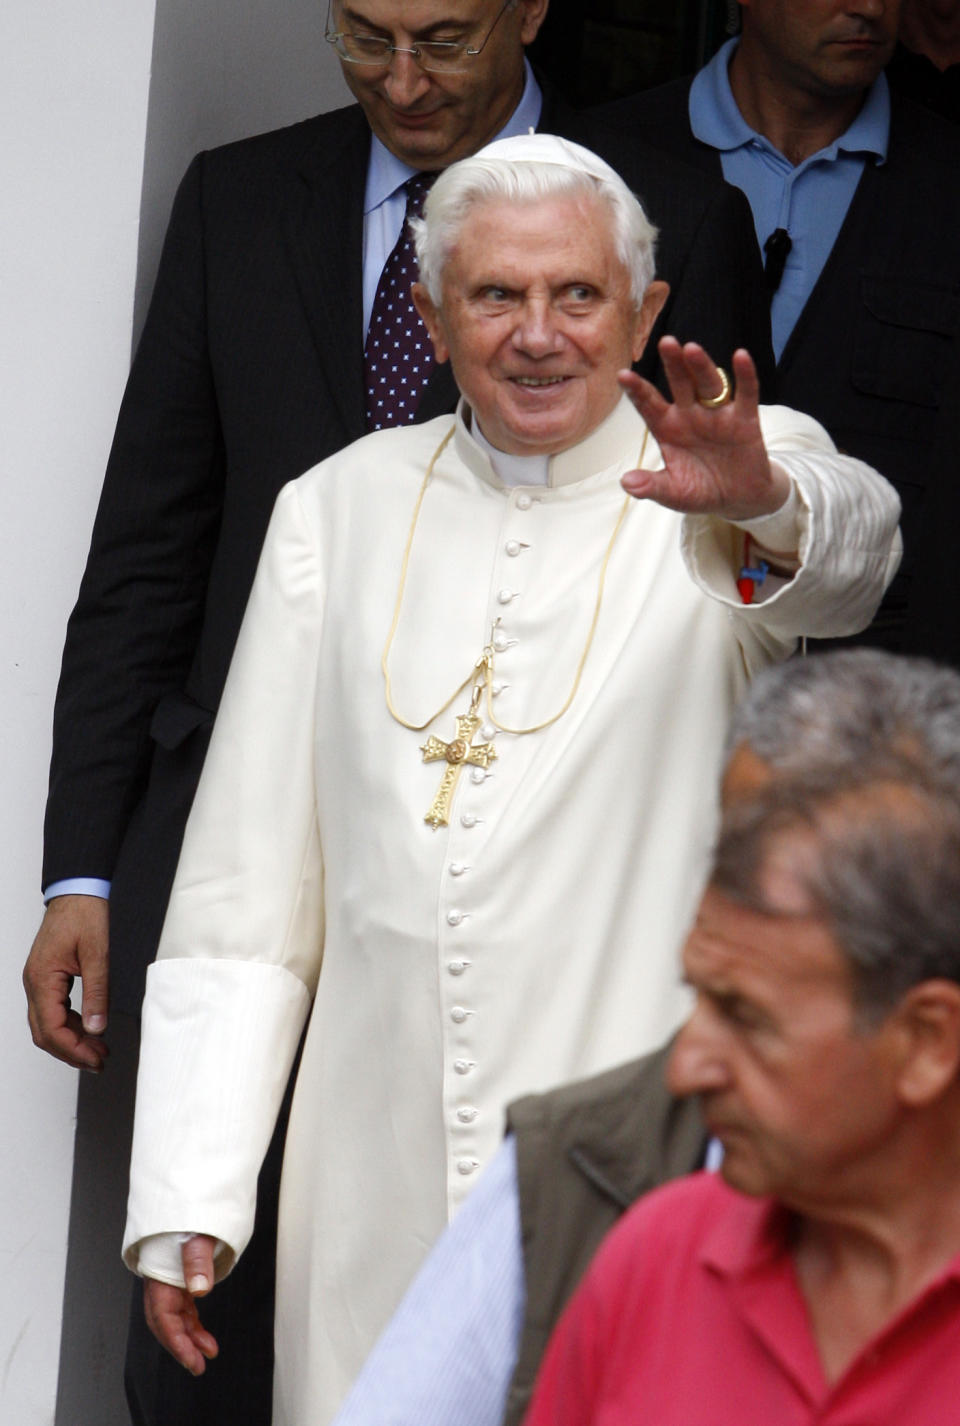 FILE - Pope Benedict XVI waves as he leaves the Regional Hospital in Aosta, Italy, on July 17, 2009, after surgery on his right wrist, which he broke during a late-night fall in his Alpine vacation chalet. Pope Emeritus Benedict XVI, the German theologian who will be remembered as the first pope in 600 years to resign, has died, the Vatican announced Saturday. He was 95. (AP Photo/Luca Bruno, File)